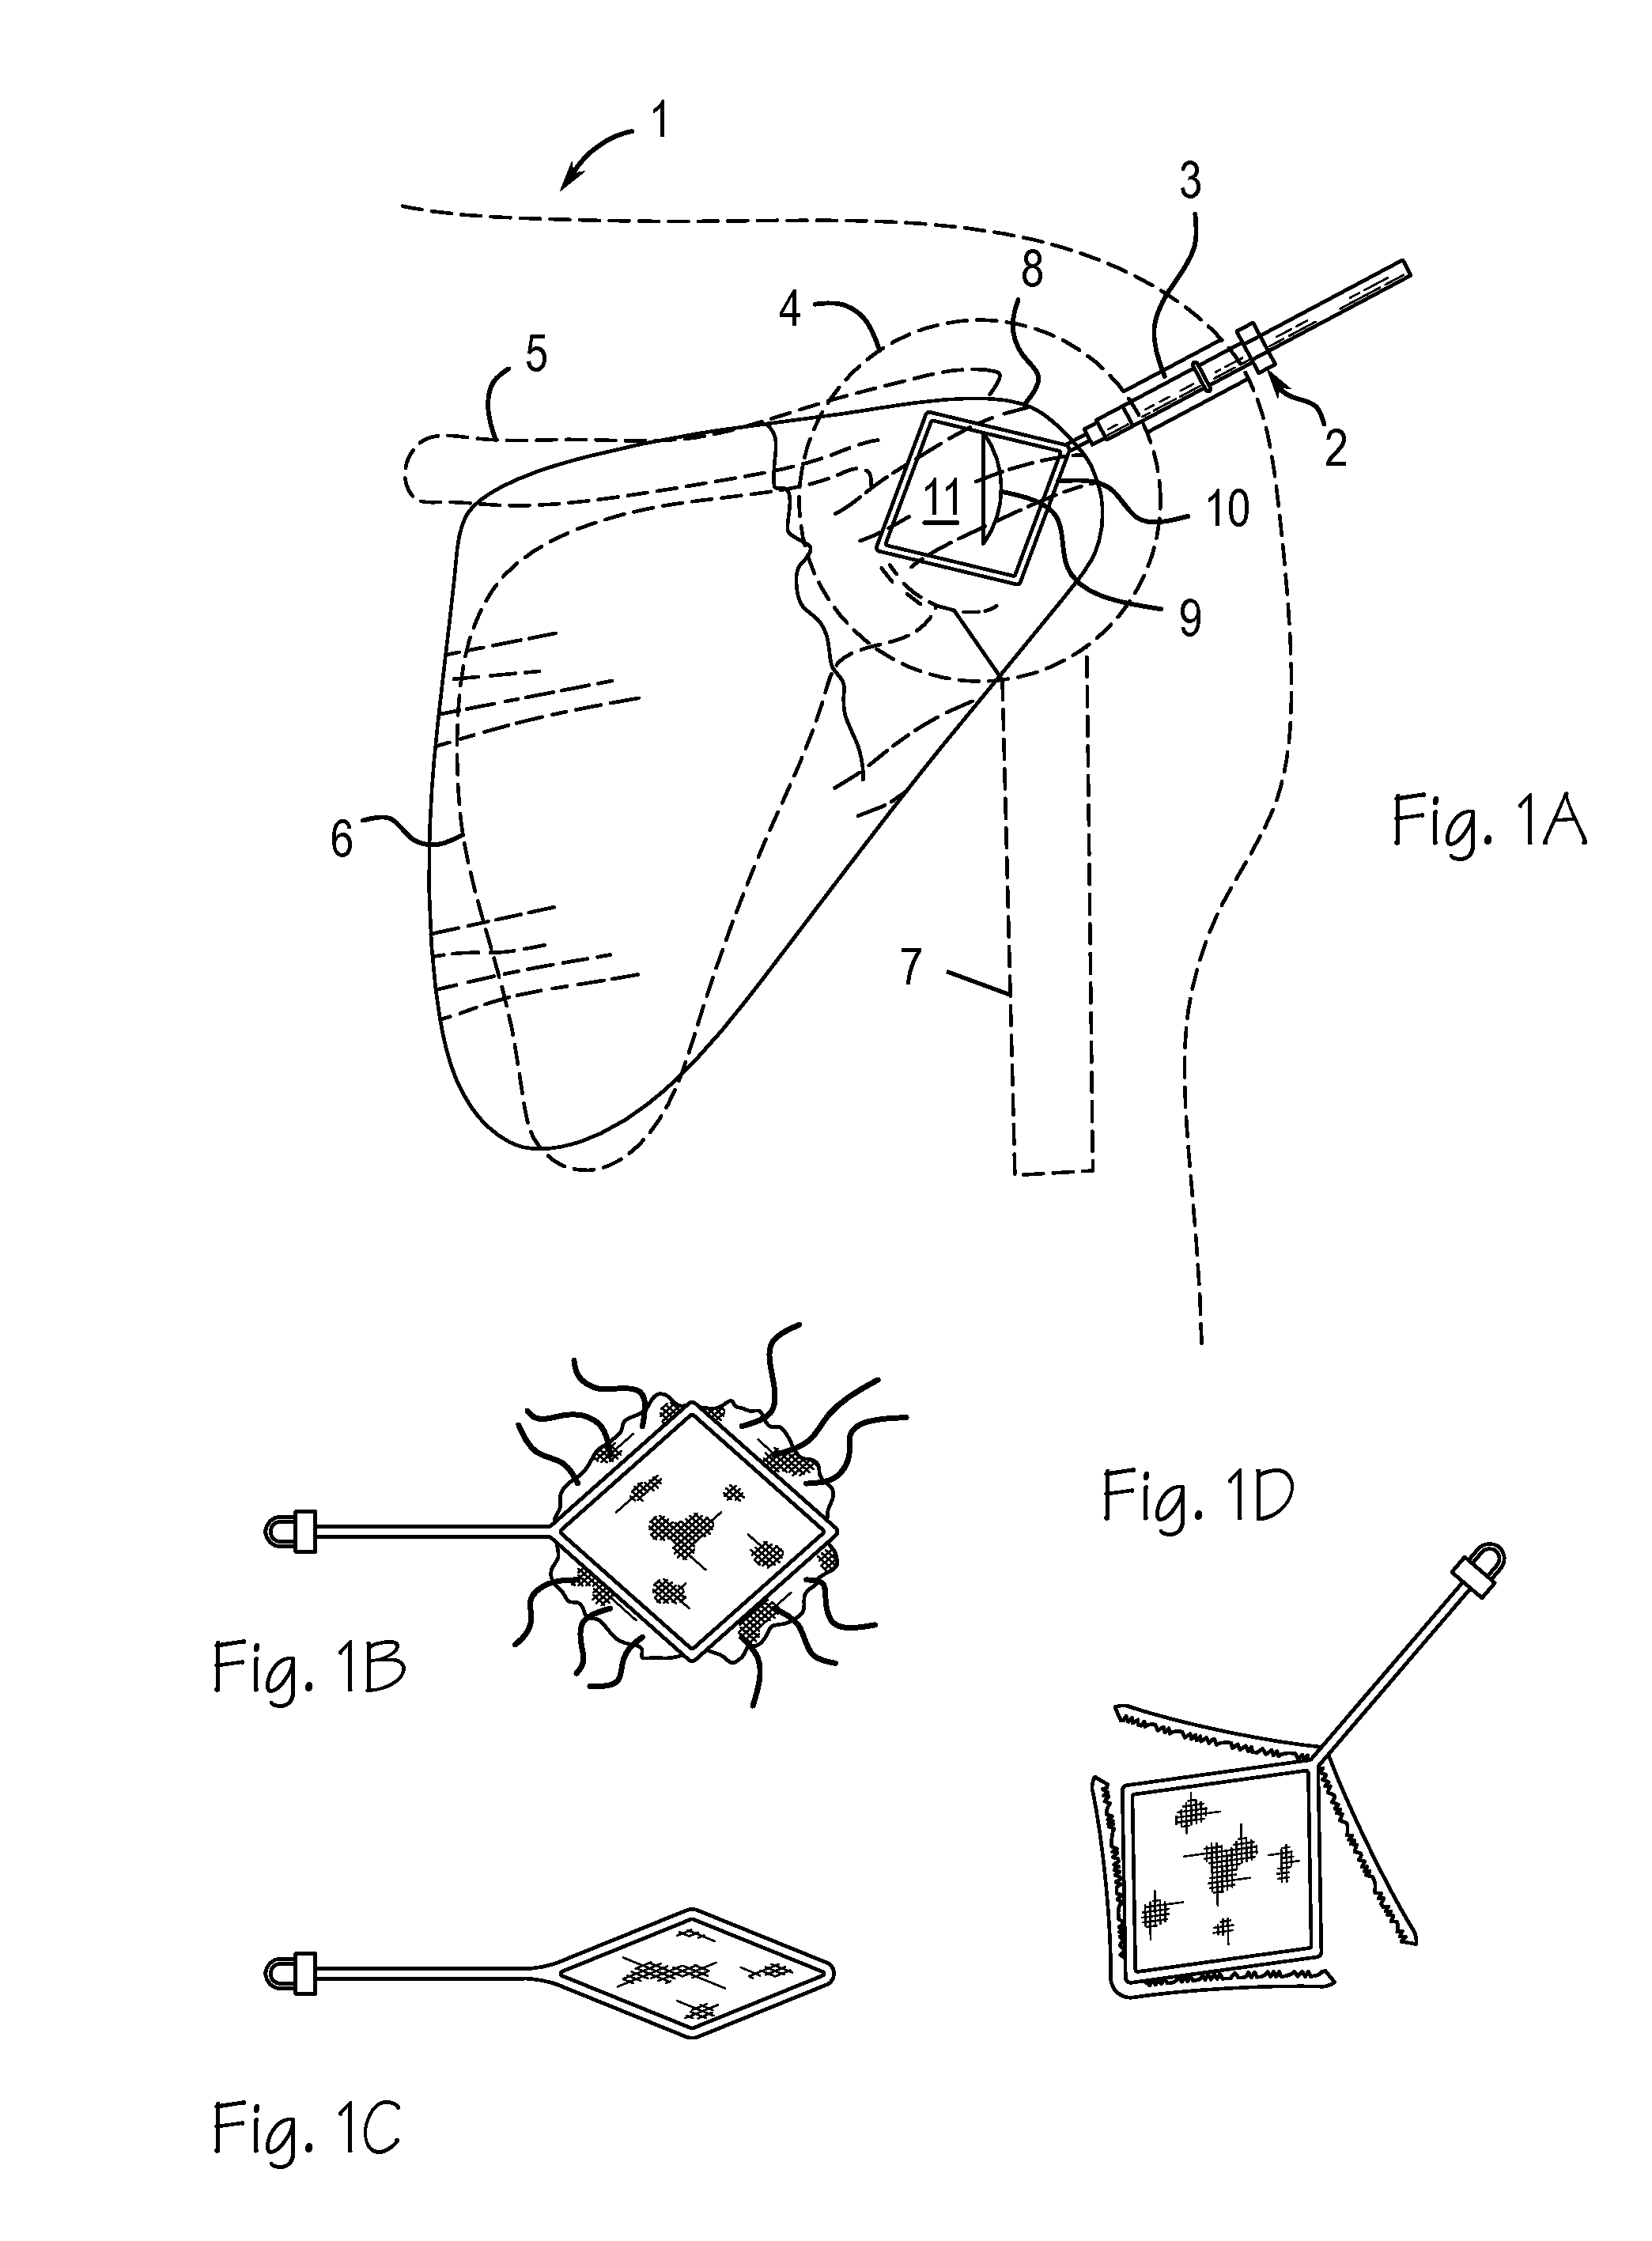 Method and Devices for Implantation of Biologic Constructs